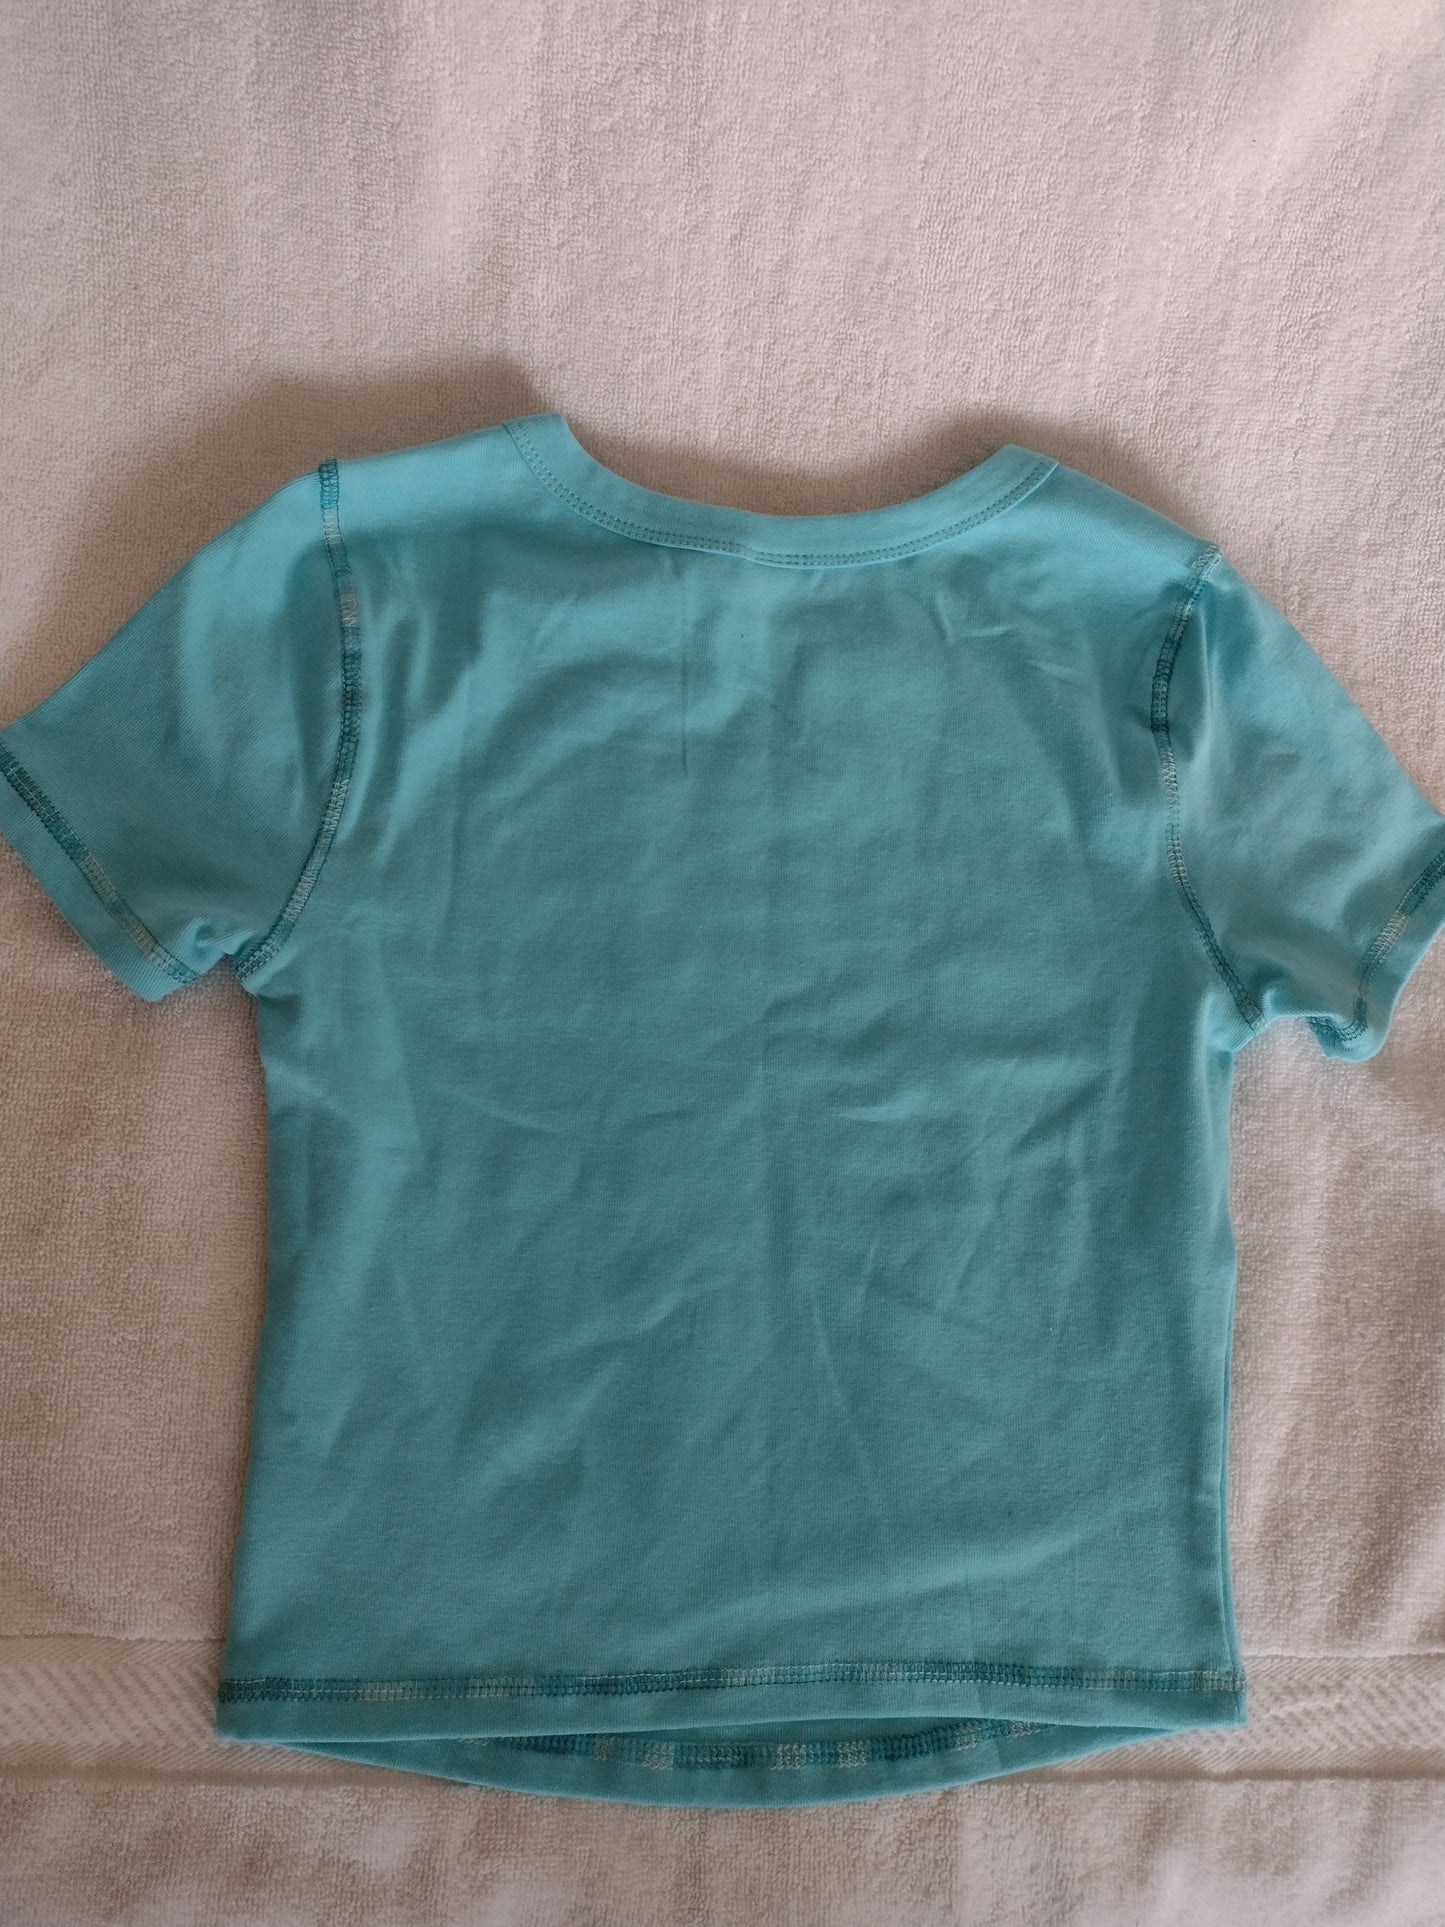 Girls T-Shirt by Wild Fable Size XS Youth Aqua Blue